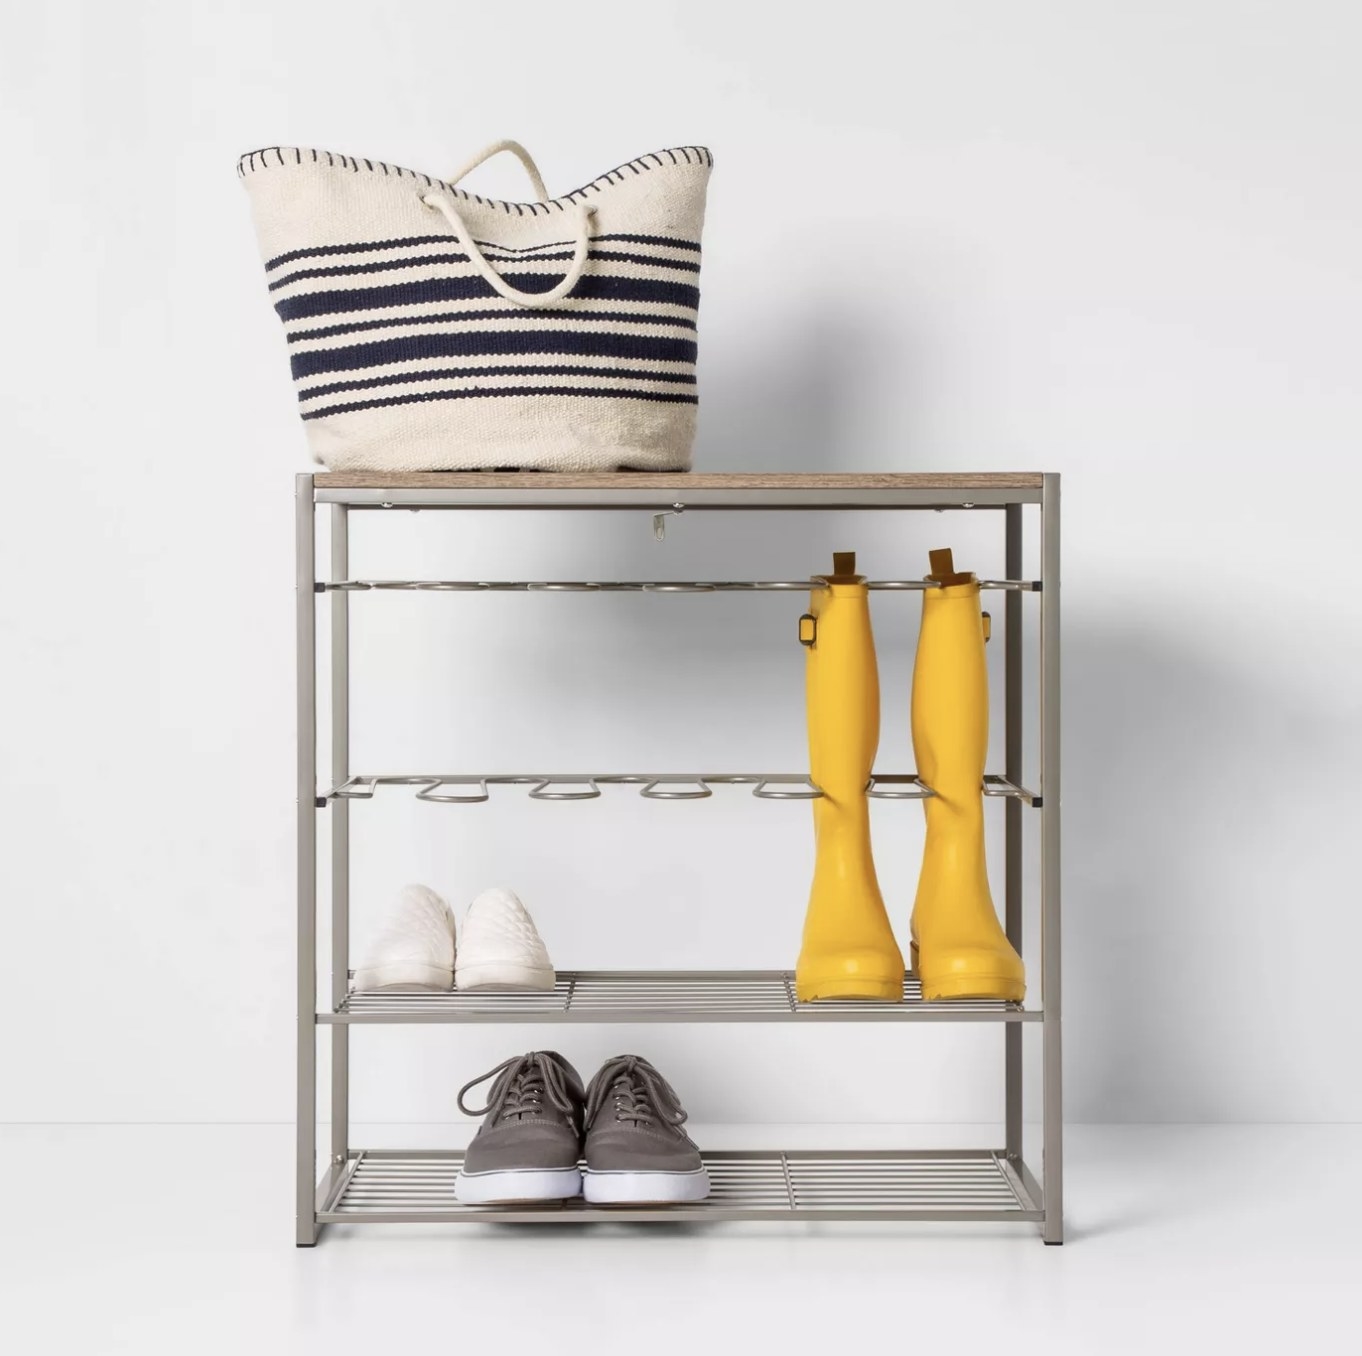 A shoe rack with two pairs of sneakers, a pair of yellow rain boots, and a large tote bag